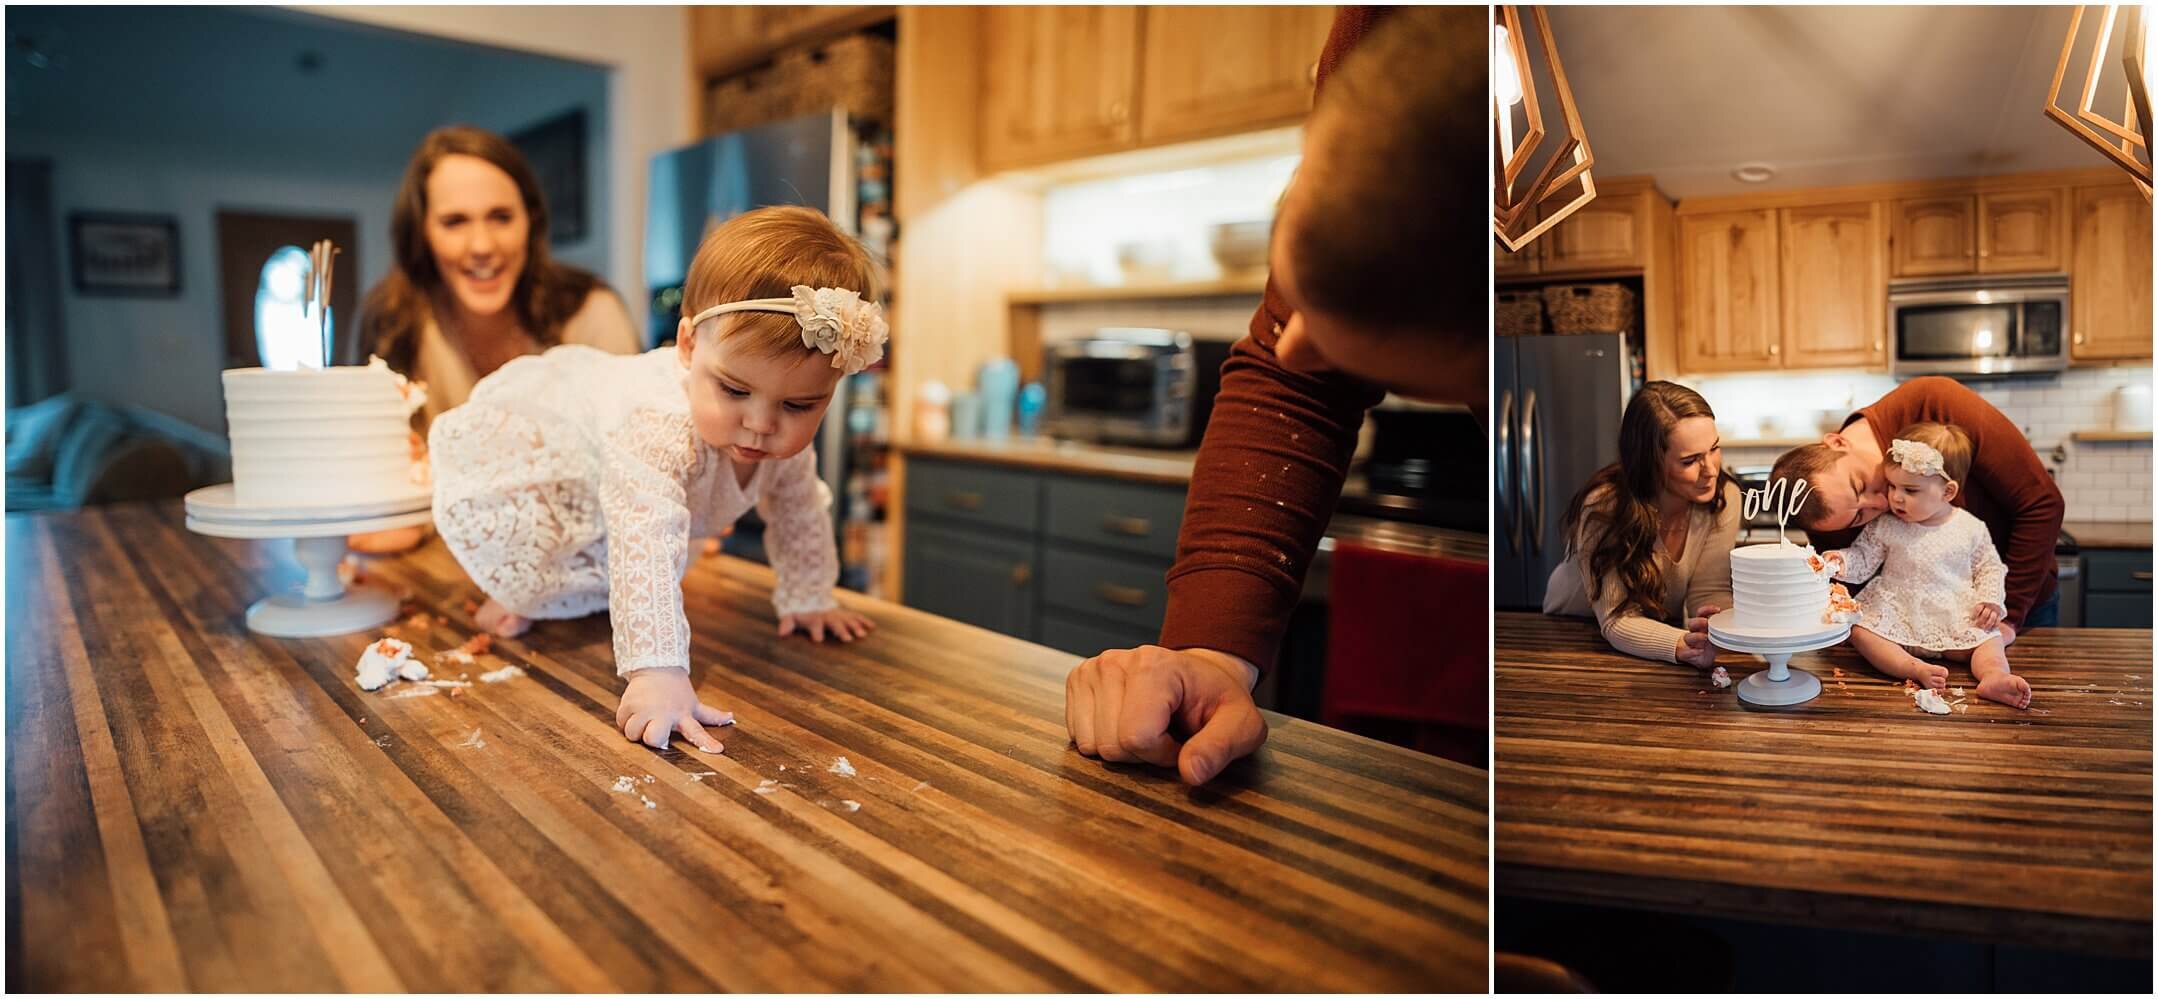 cake smash | home photography | one year old birthday | Kelly lovan photography